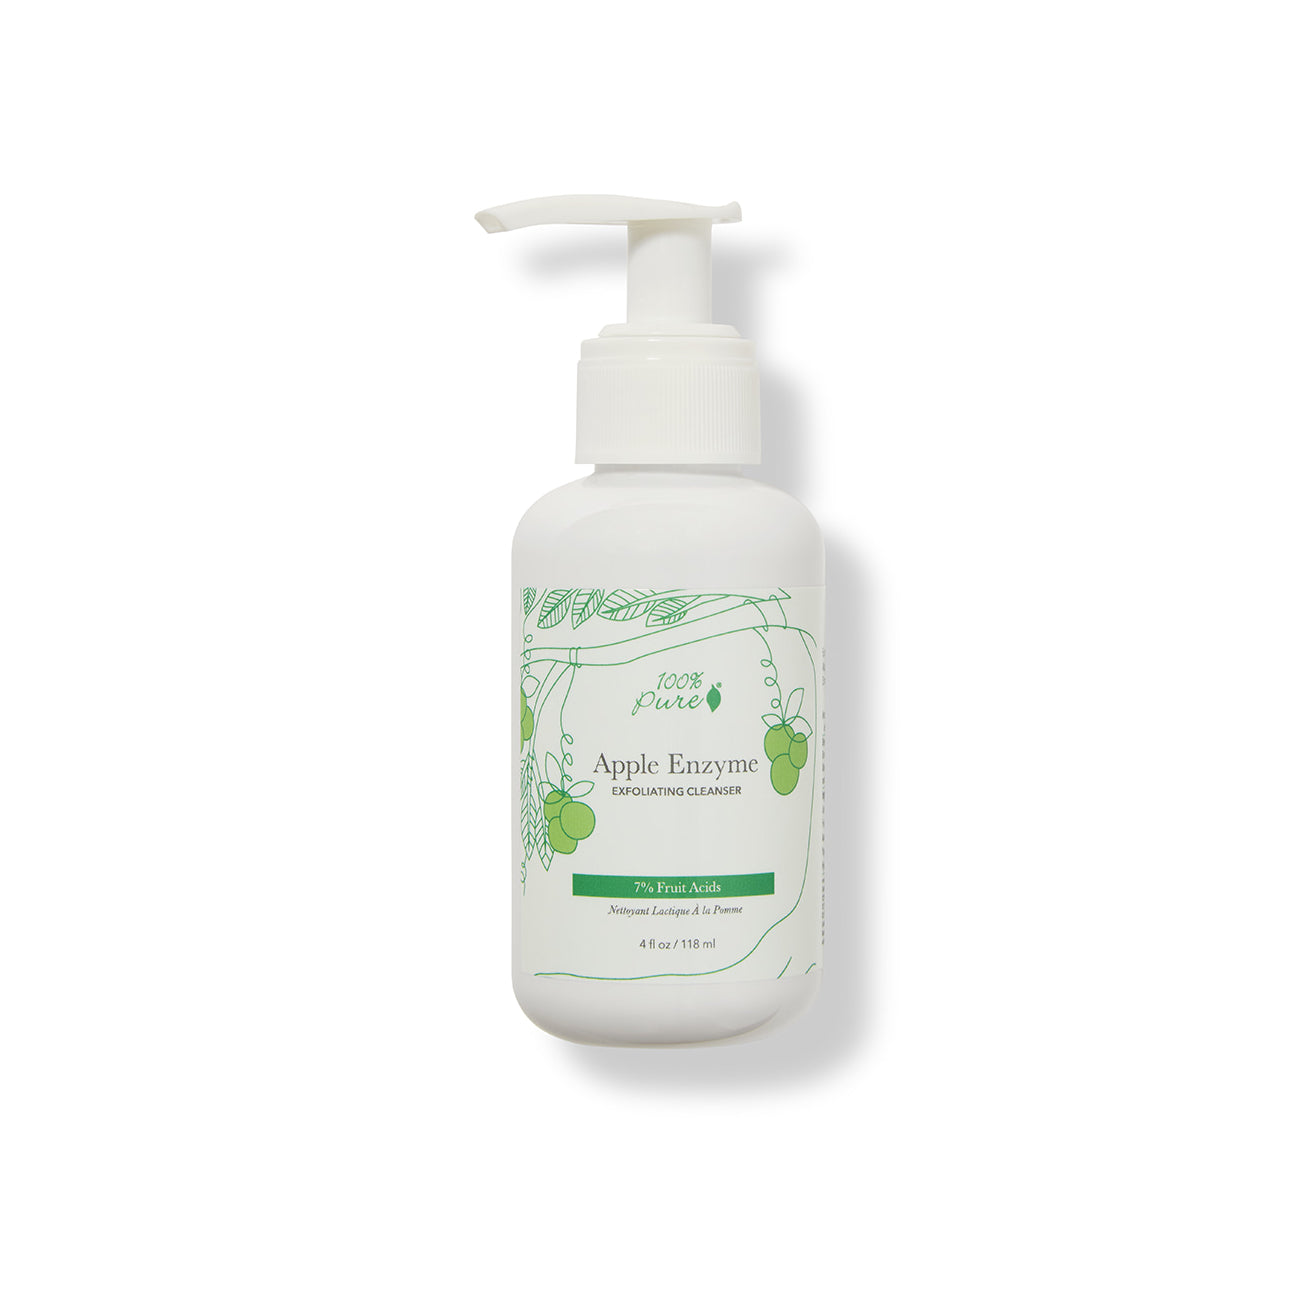 100% PURE 7% Fruit Acids Apple Enzyme Exfoliating Cleanser